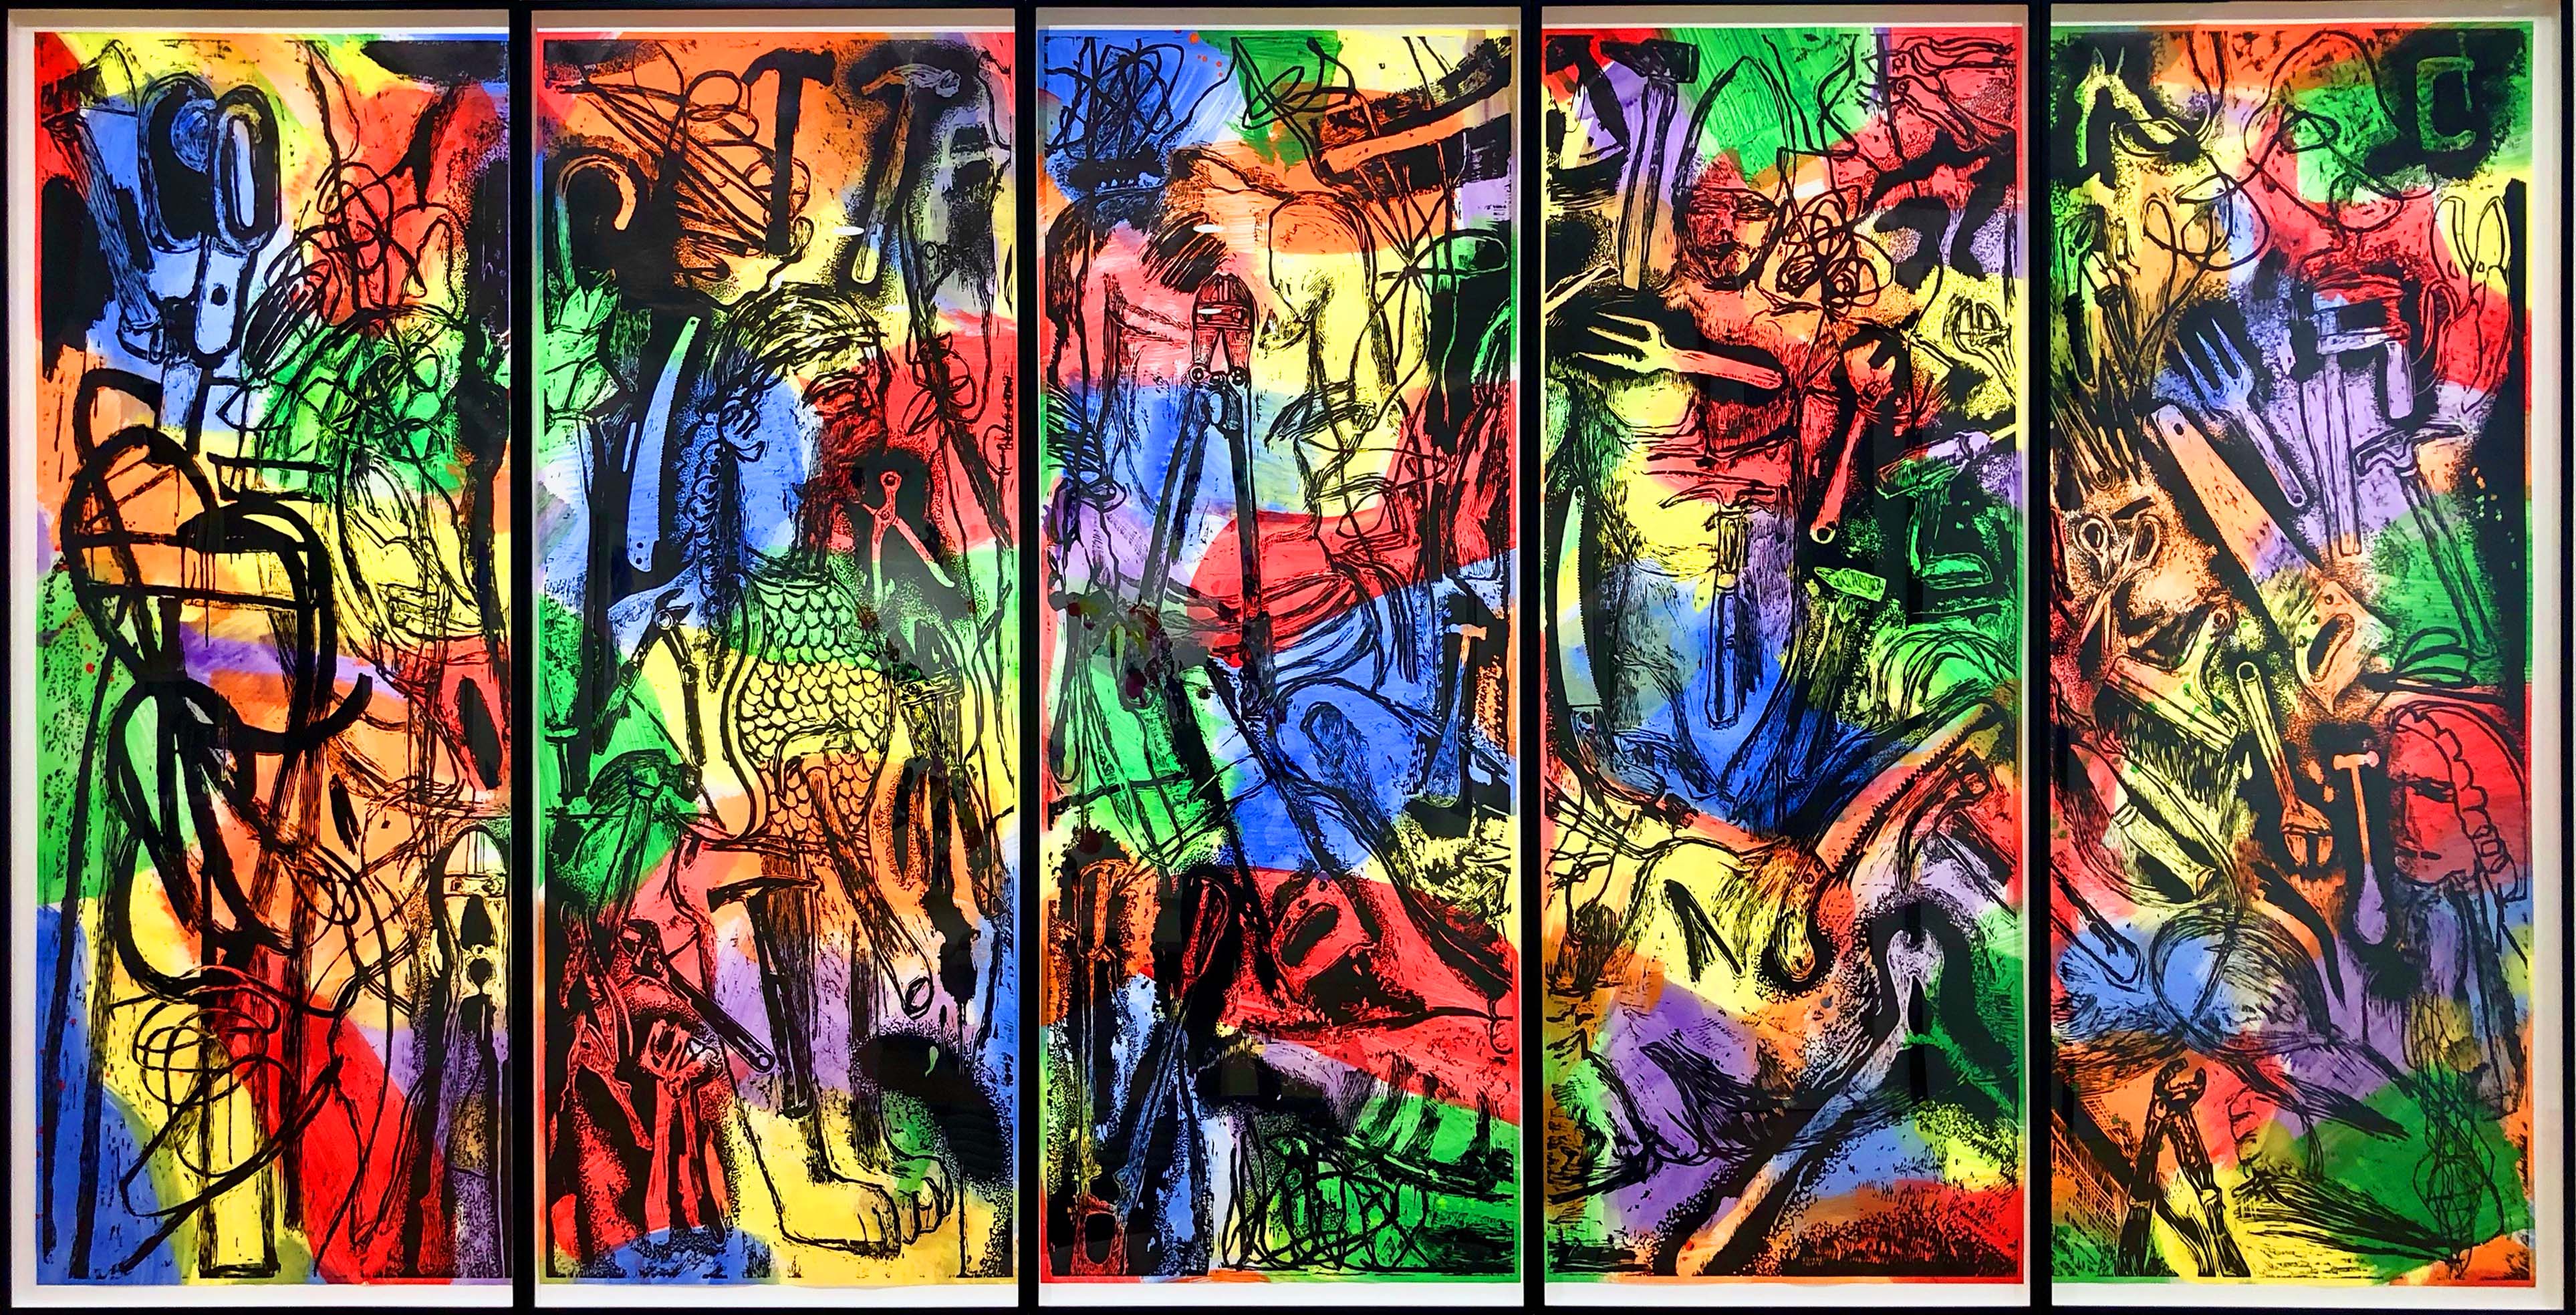 Brightly colored 5-panel print of tools and figures by Jim Dine